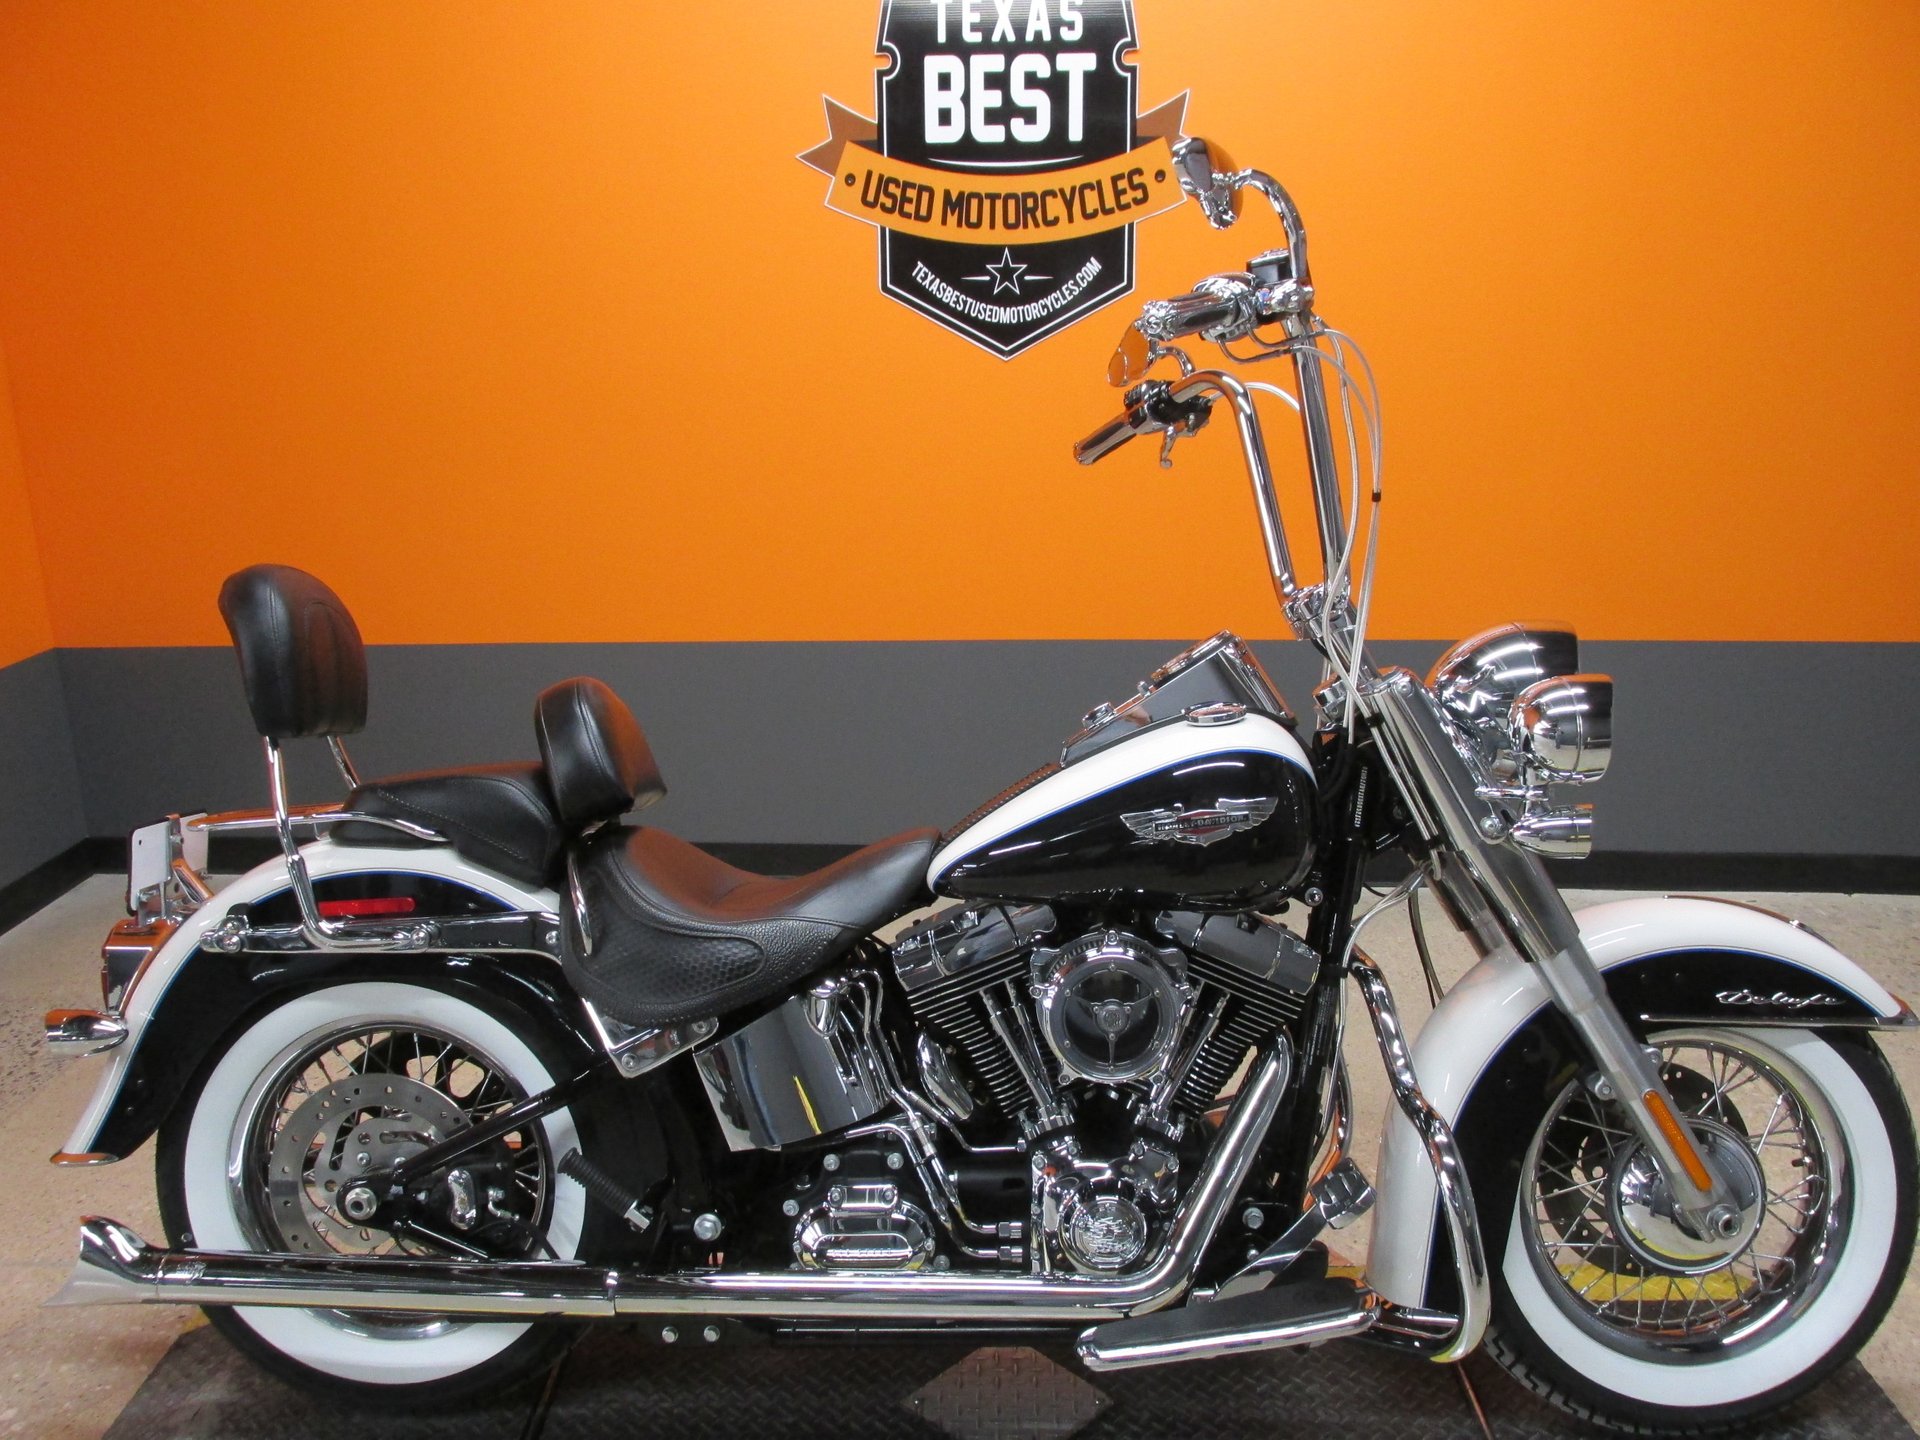 2013 Harley-Davidson Softail Deluxe | American Motorcycle Trading Company - Used Harley Davidson